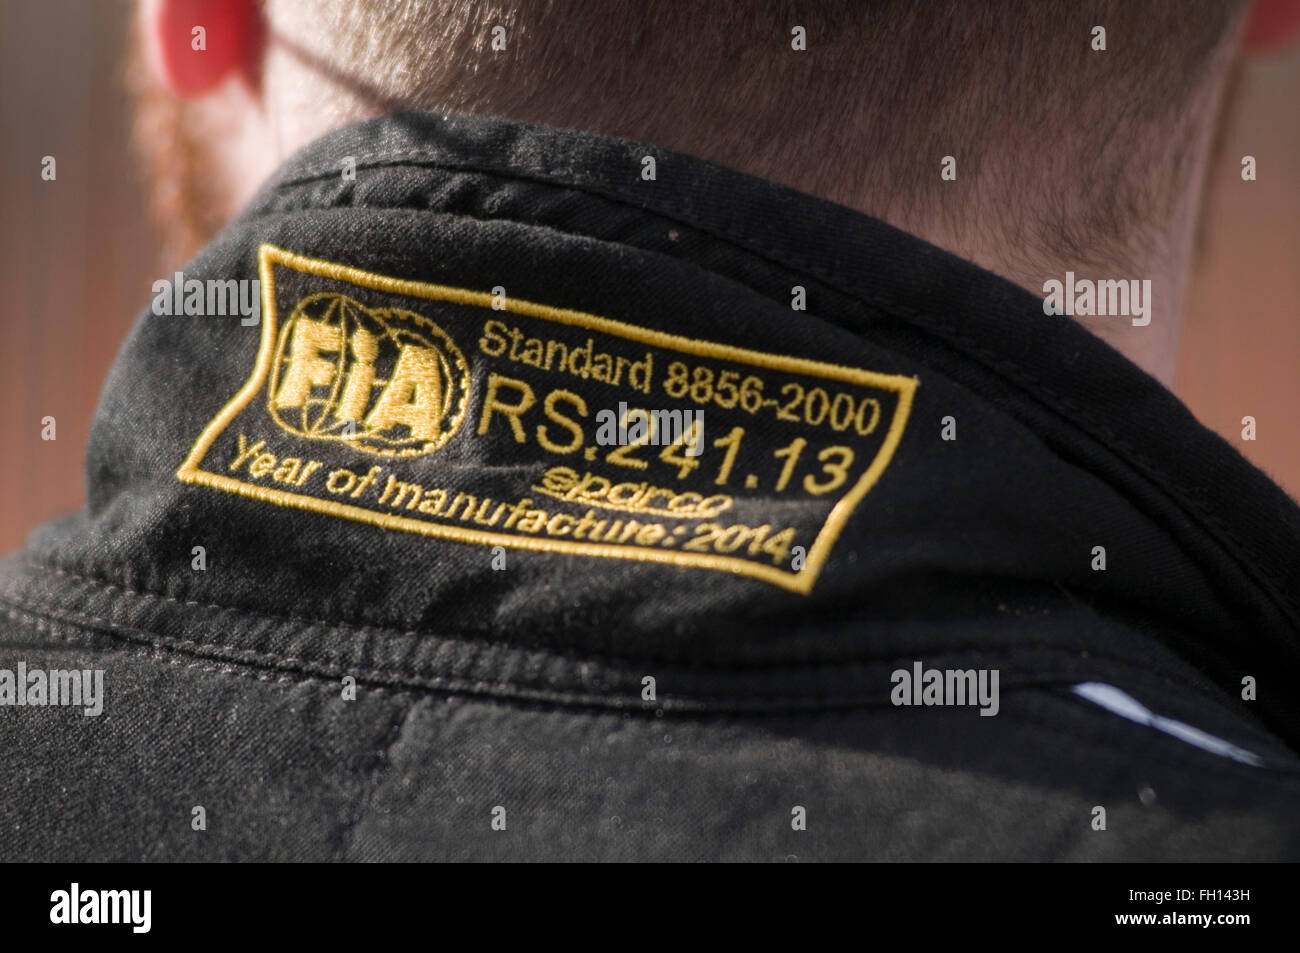 FIA approved fire suit being worn by racing driver safety standard standards fireproof proof overall overalls racing drivers sui Stock Photo